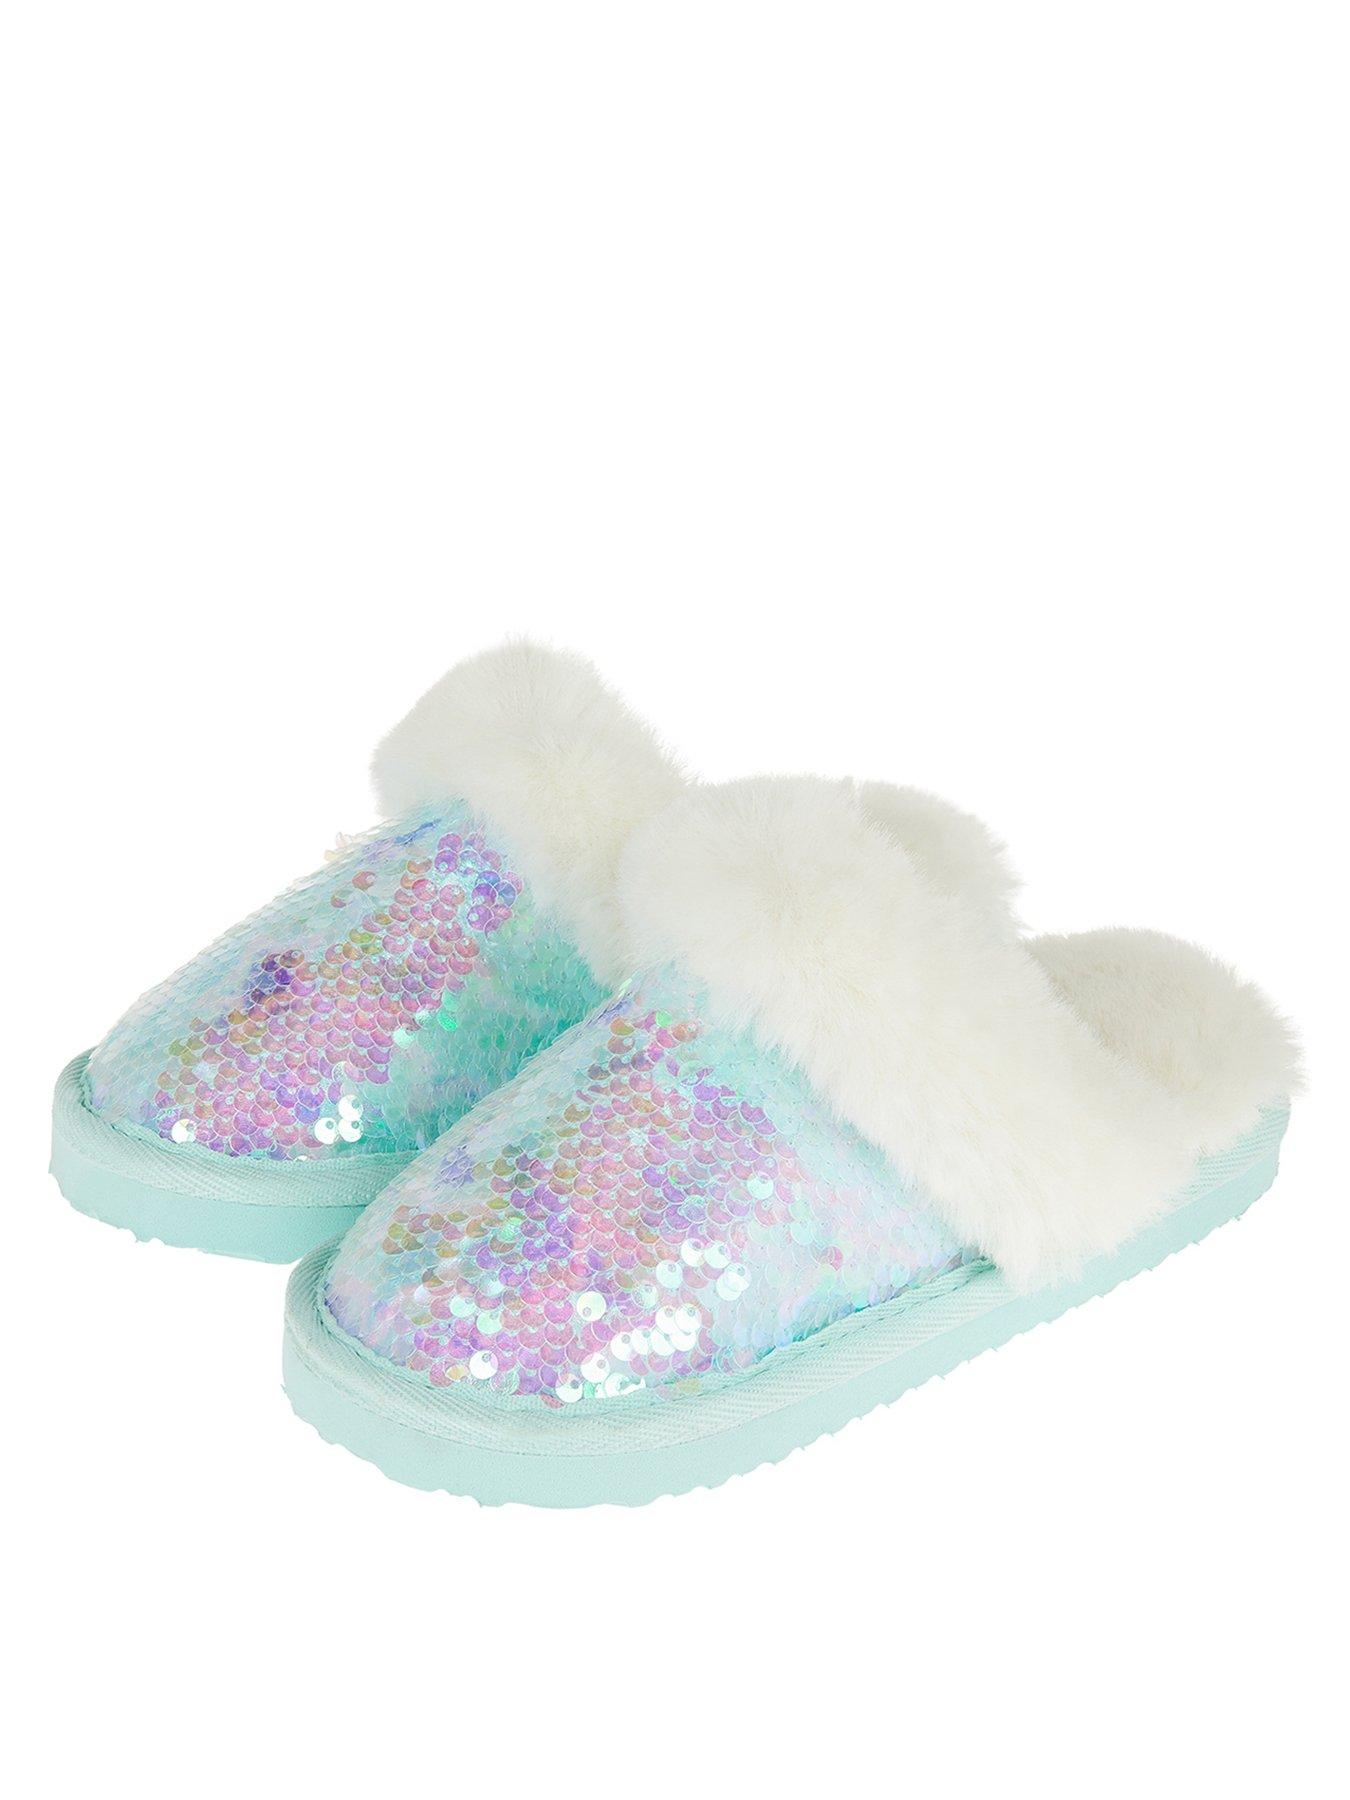 girls slippers size 7